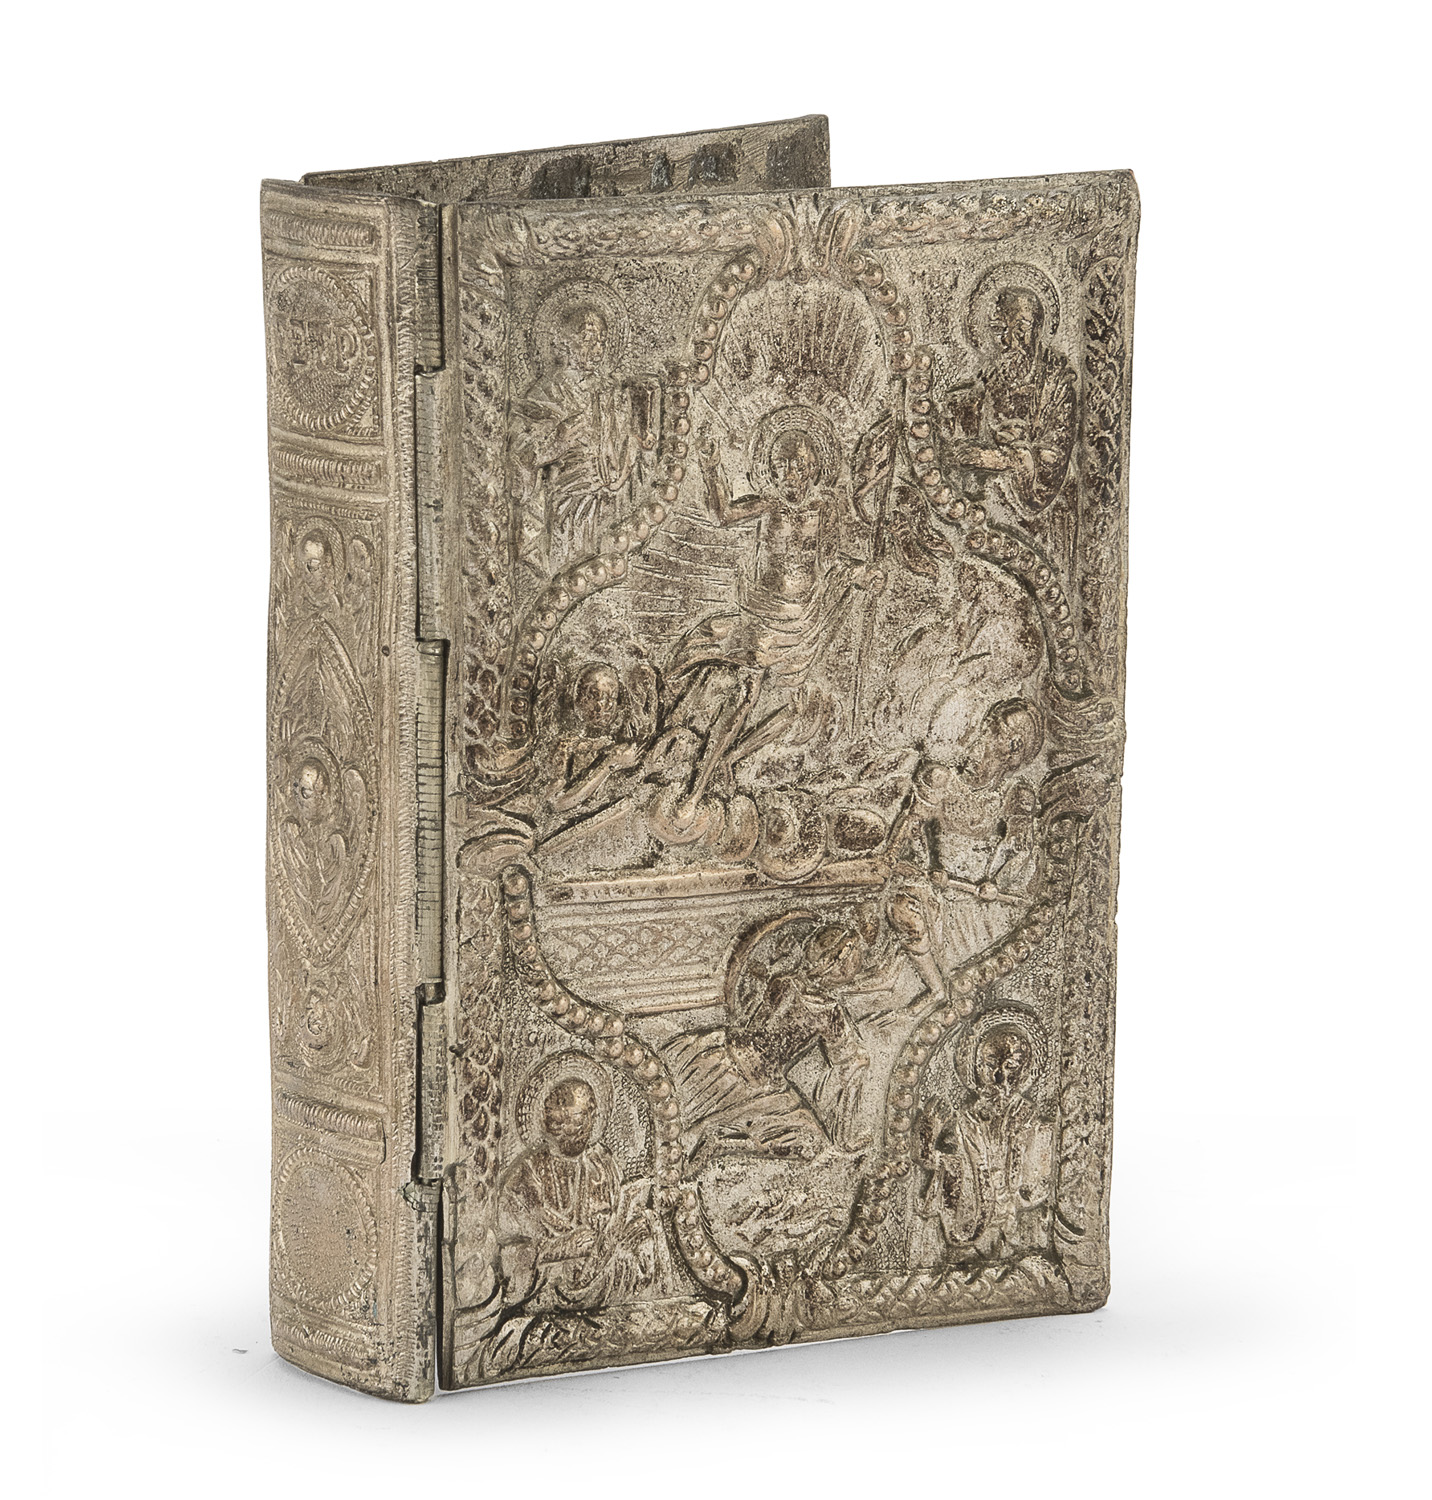 SILVER-PLATED BRONZE BOOKCOVER GREECE OR BALKANS LATE 20TH CENTURY